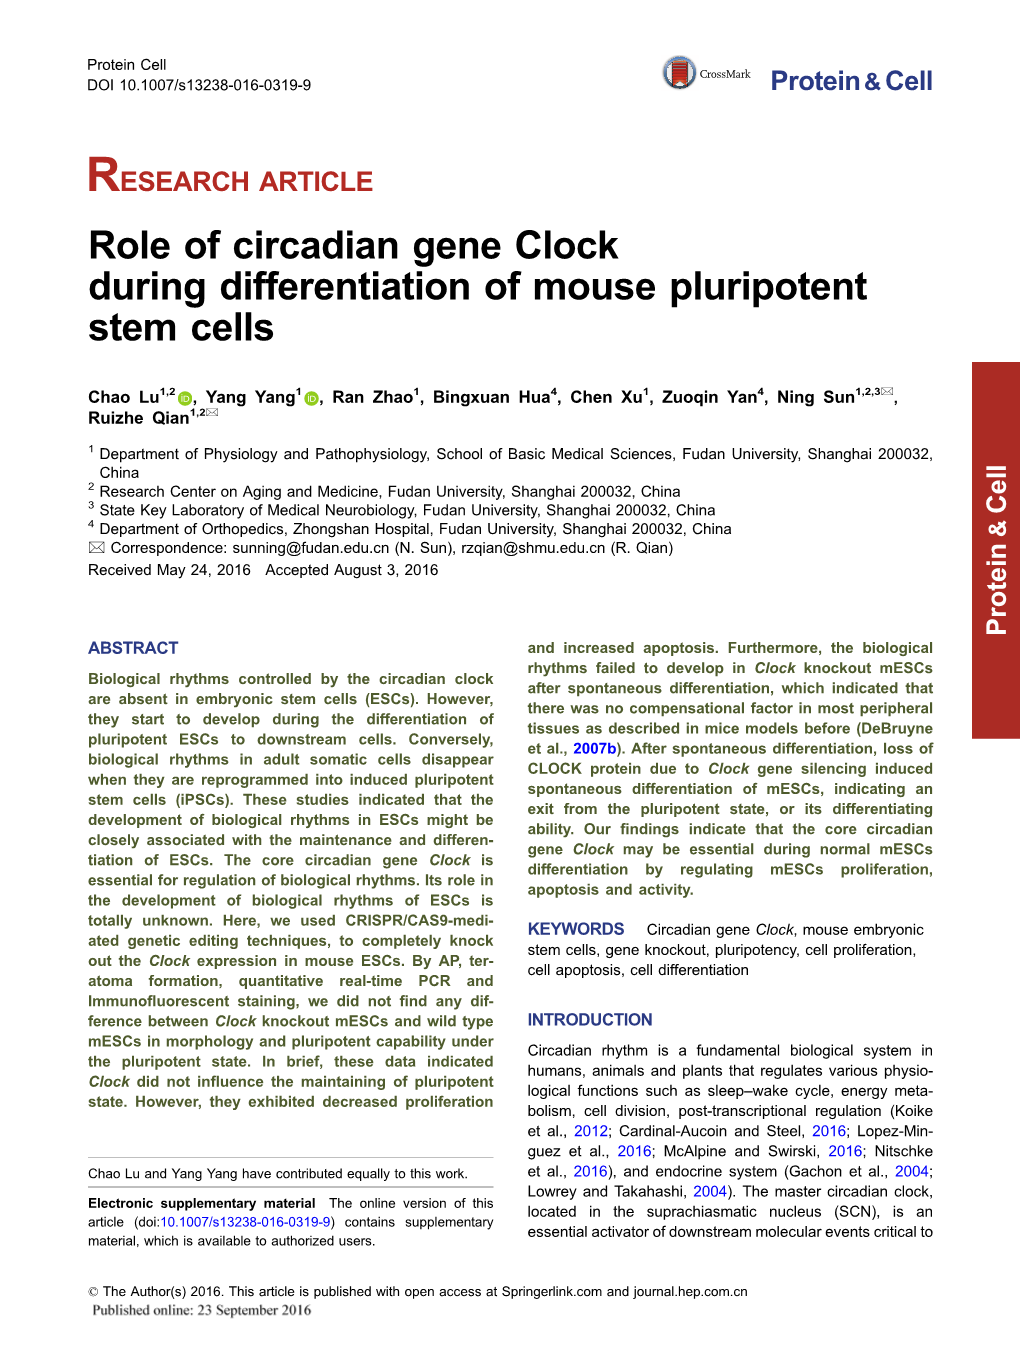 Role of Circadian Gene Clock During Differentiation of Mouse Pluripotent Stem Cells